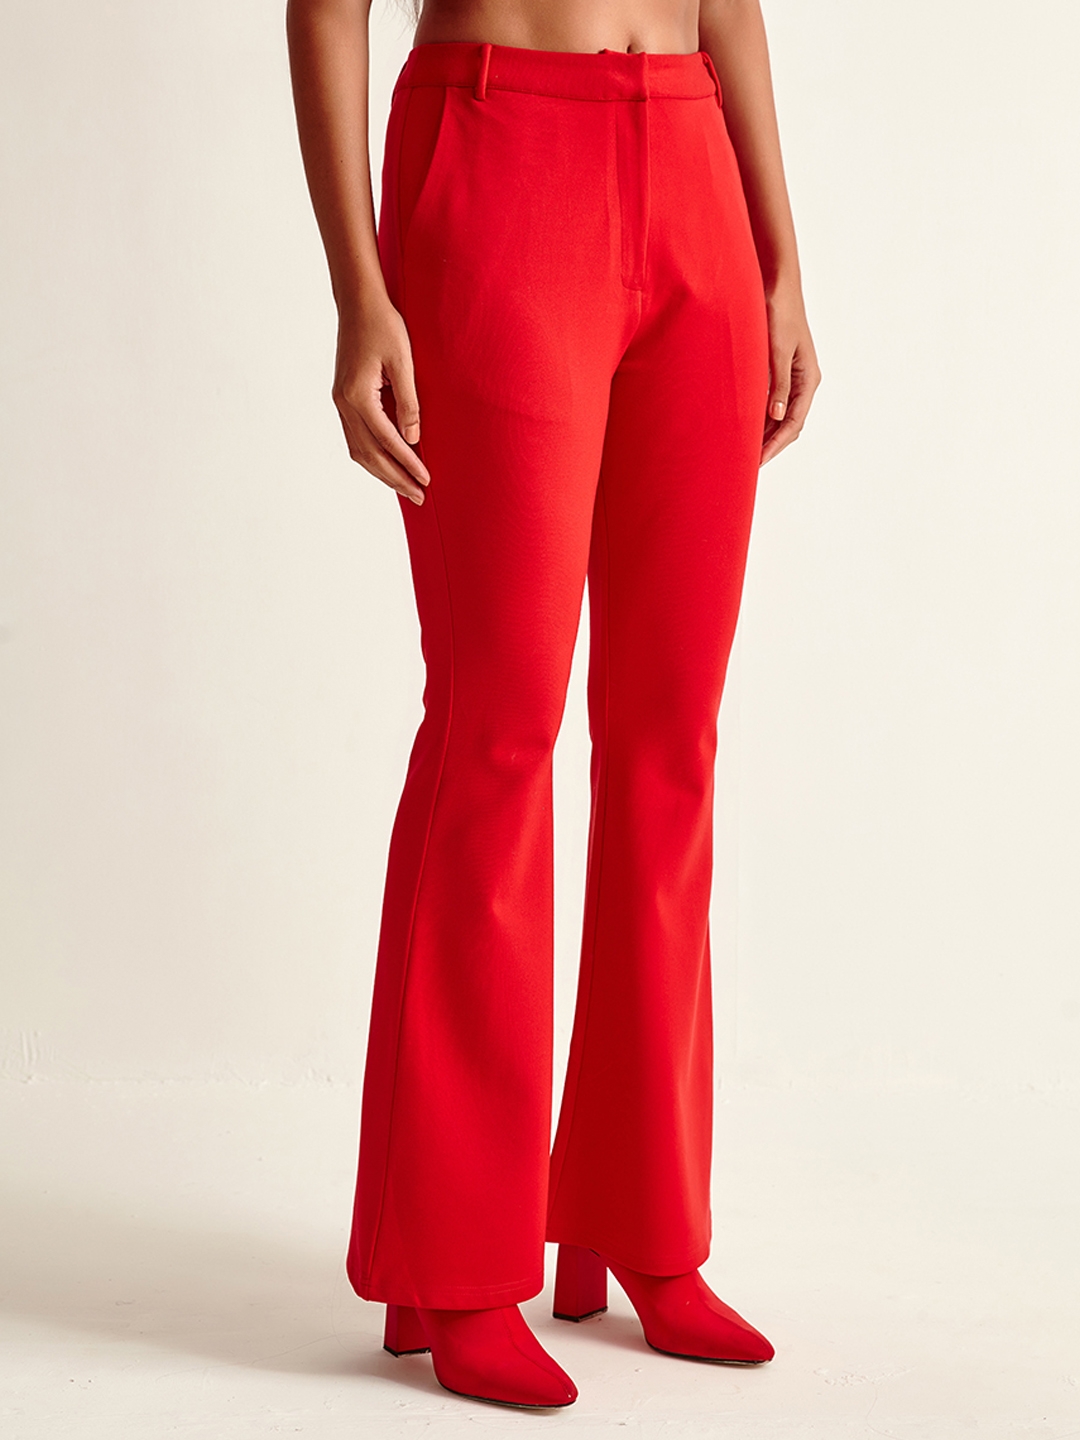 THR3LETTER Coord Set  Buy THR3LETTER Red Romance Co Ord Loose Fit Shirt  High  Waisted Trousers Set of 2 Online  Nykaa Fashion